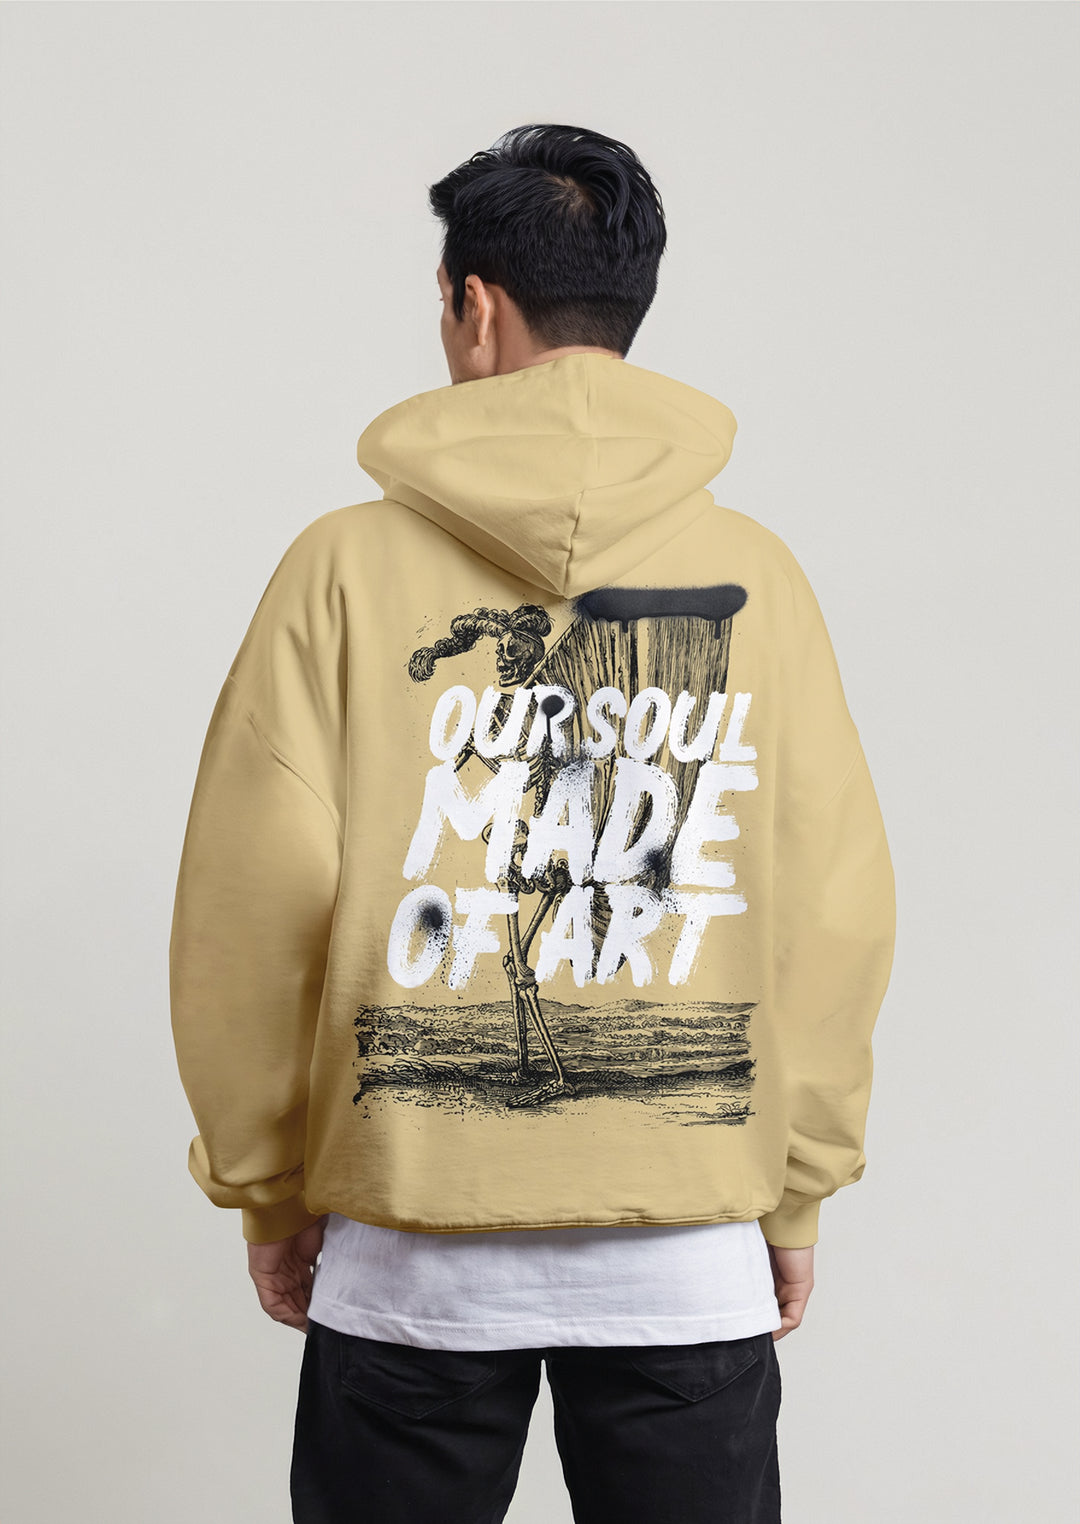 Our soul made of art 100% cotton Heavyweight hoodie